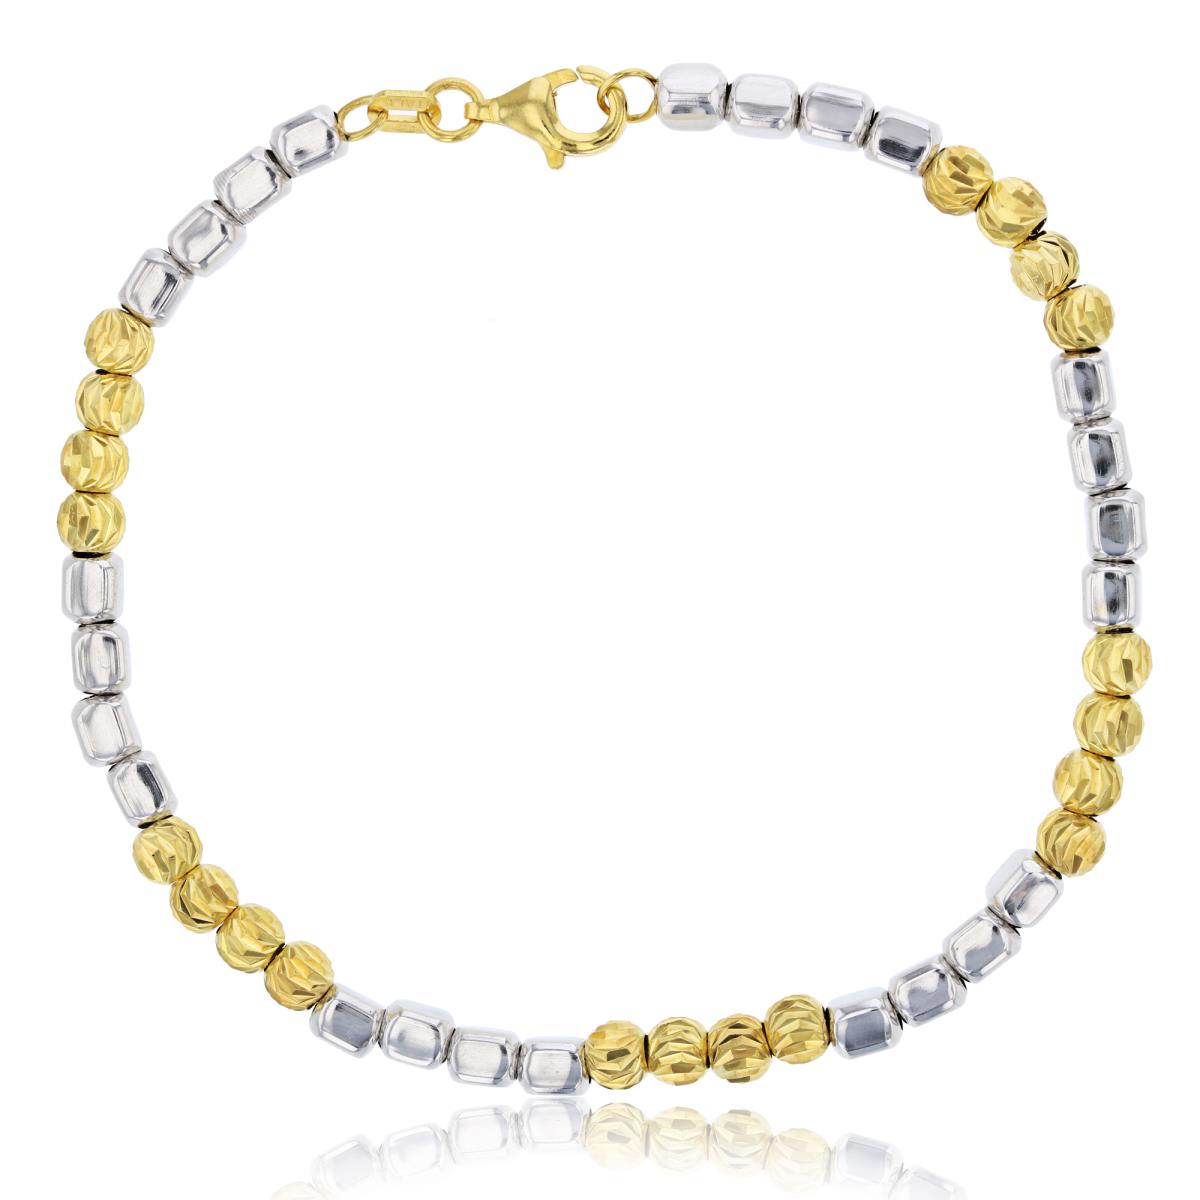 Sterling Silver Yellow & White Anti-Tarnish 4.00mm Moon Cut & Polished Square Beads 7.25" Bracelet